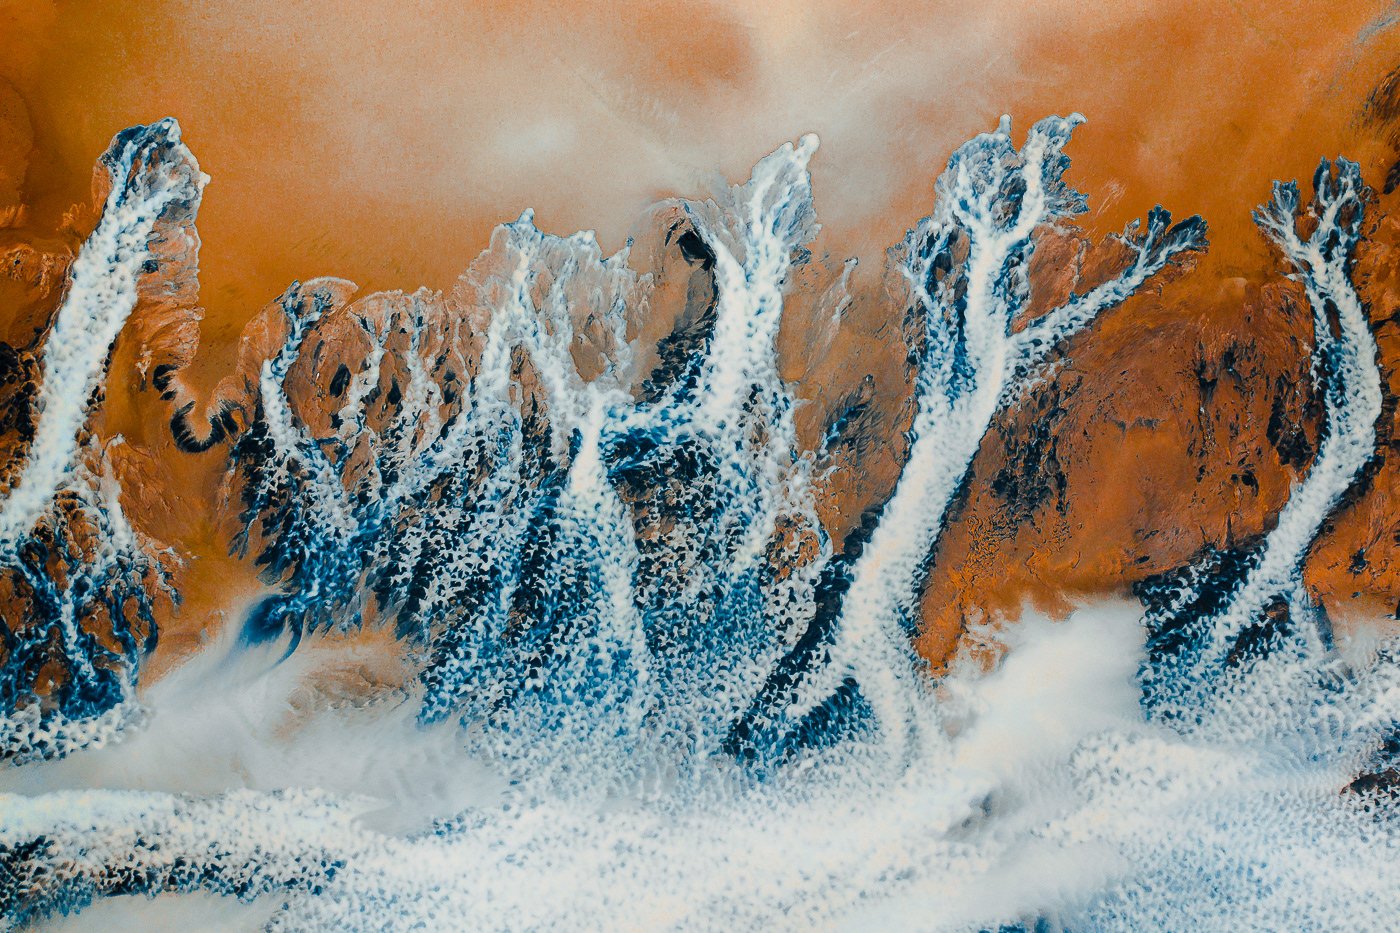 Gabor Nagy Reveals the Otherworldly Abstract Rivers of Iceland